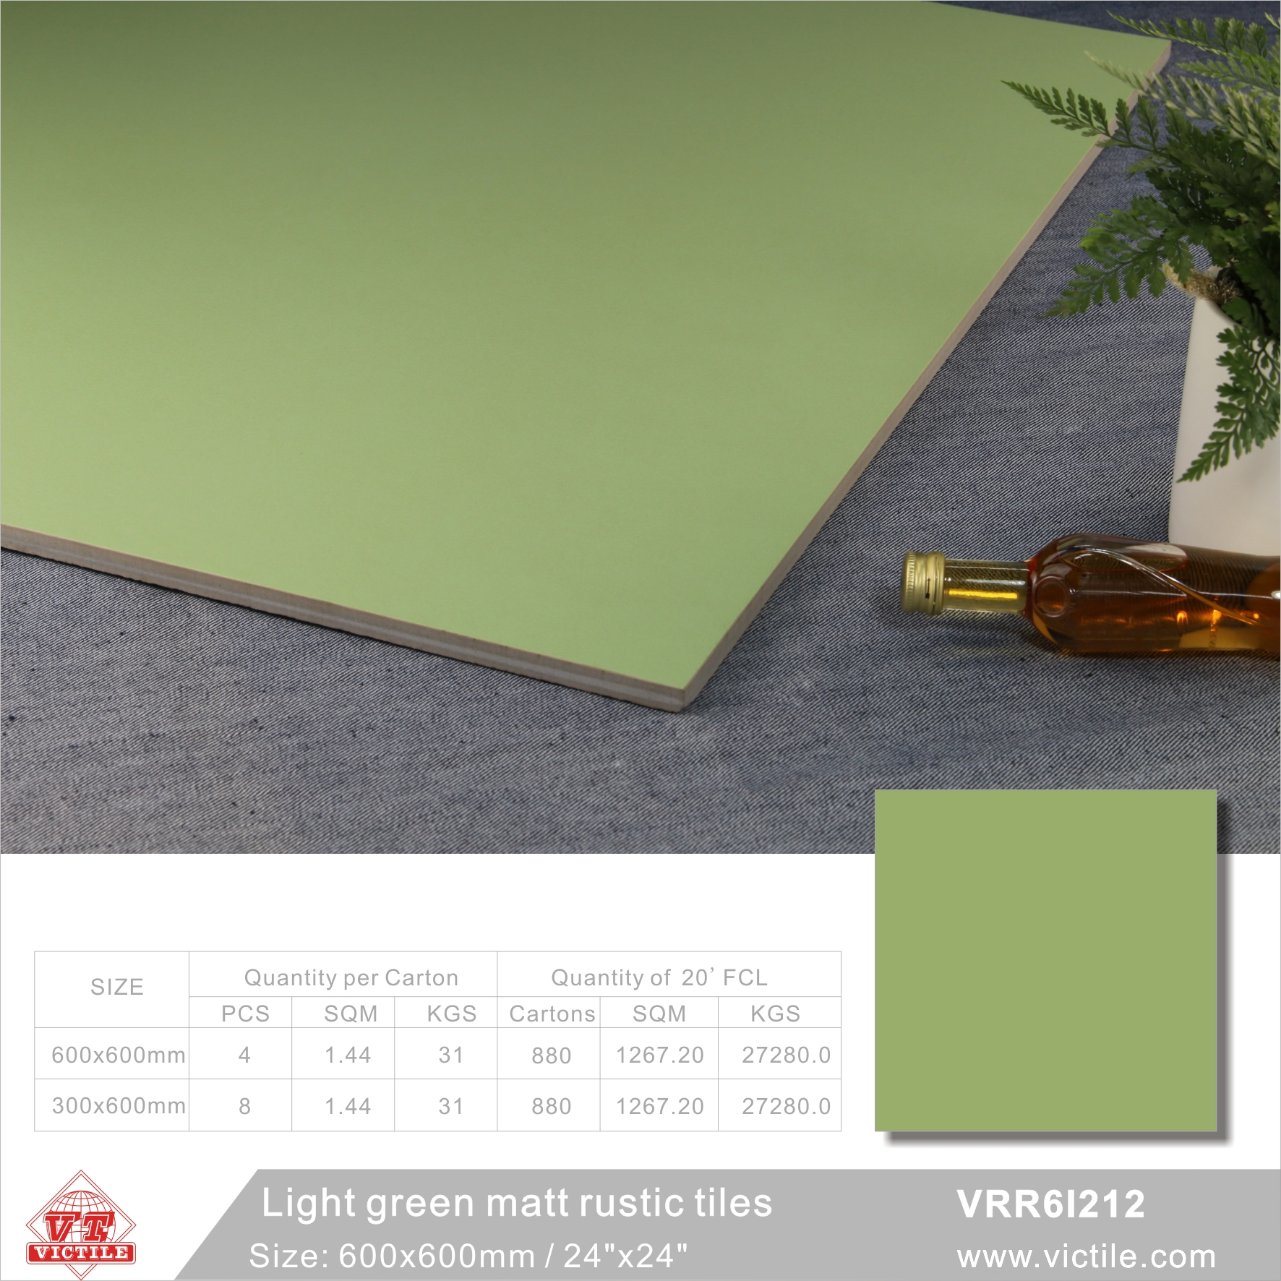 600X600mm, 300X600mm Green Building Material China Foshan Pure Color Rustic Porcelain Floor Wall Tile (VRR6I212, 24''x24''; 12''x24'')